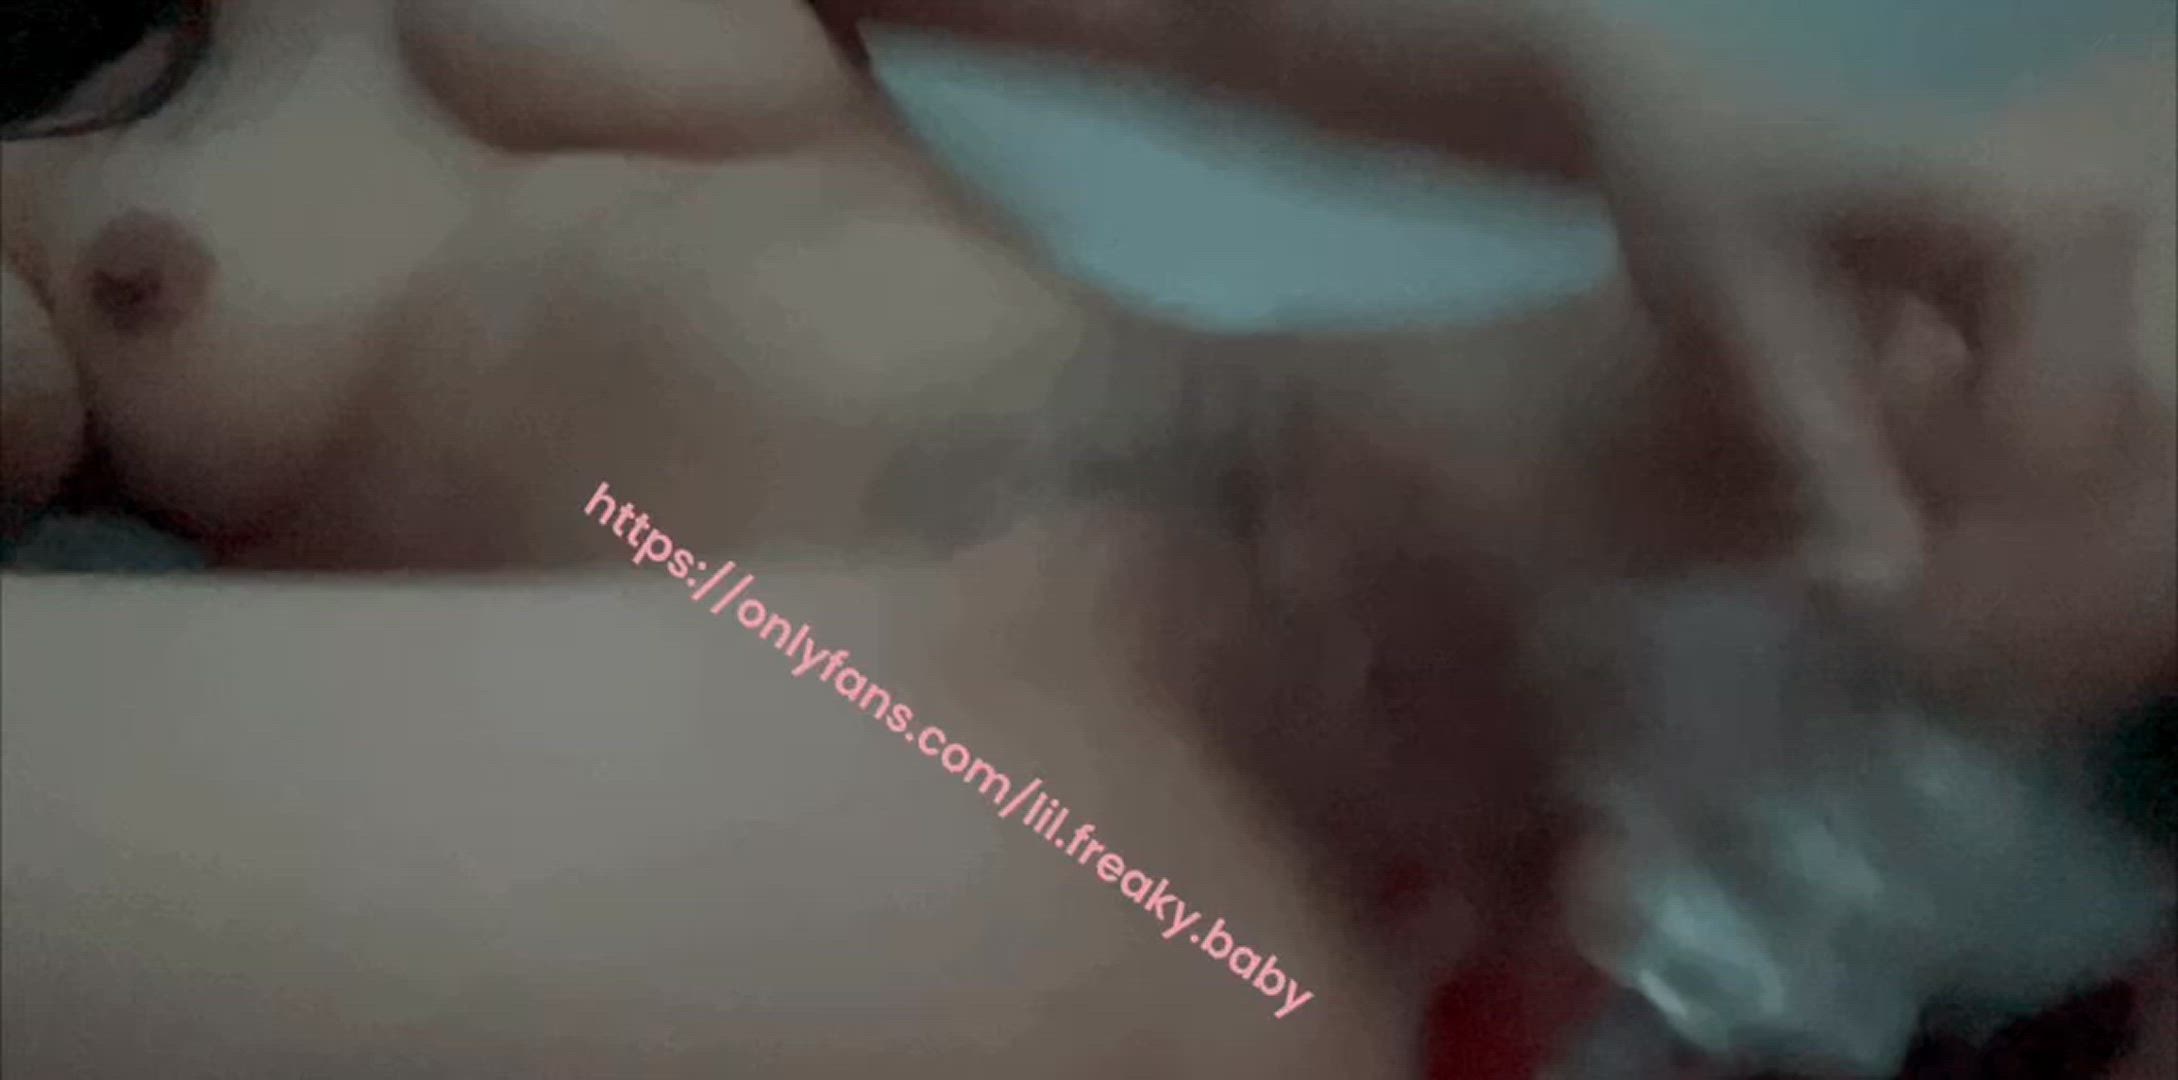 Asian porn video with onlyfans model lilfreakybaby <strong>@lil.freaky.baby</strong>